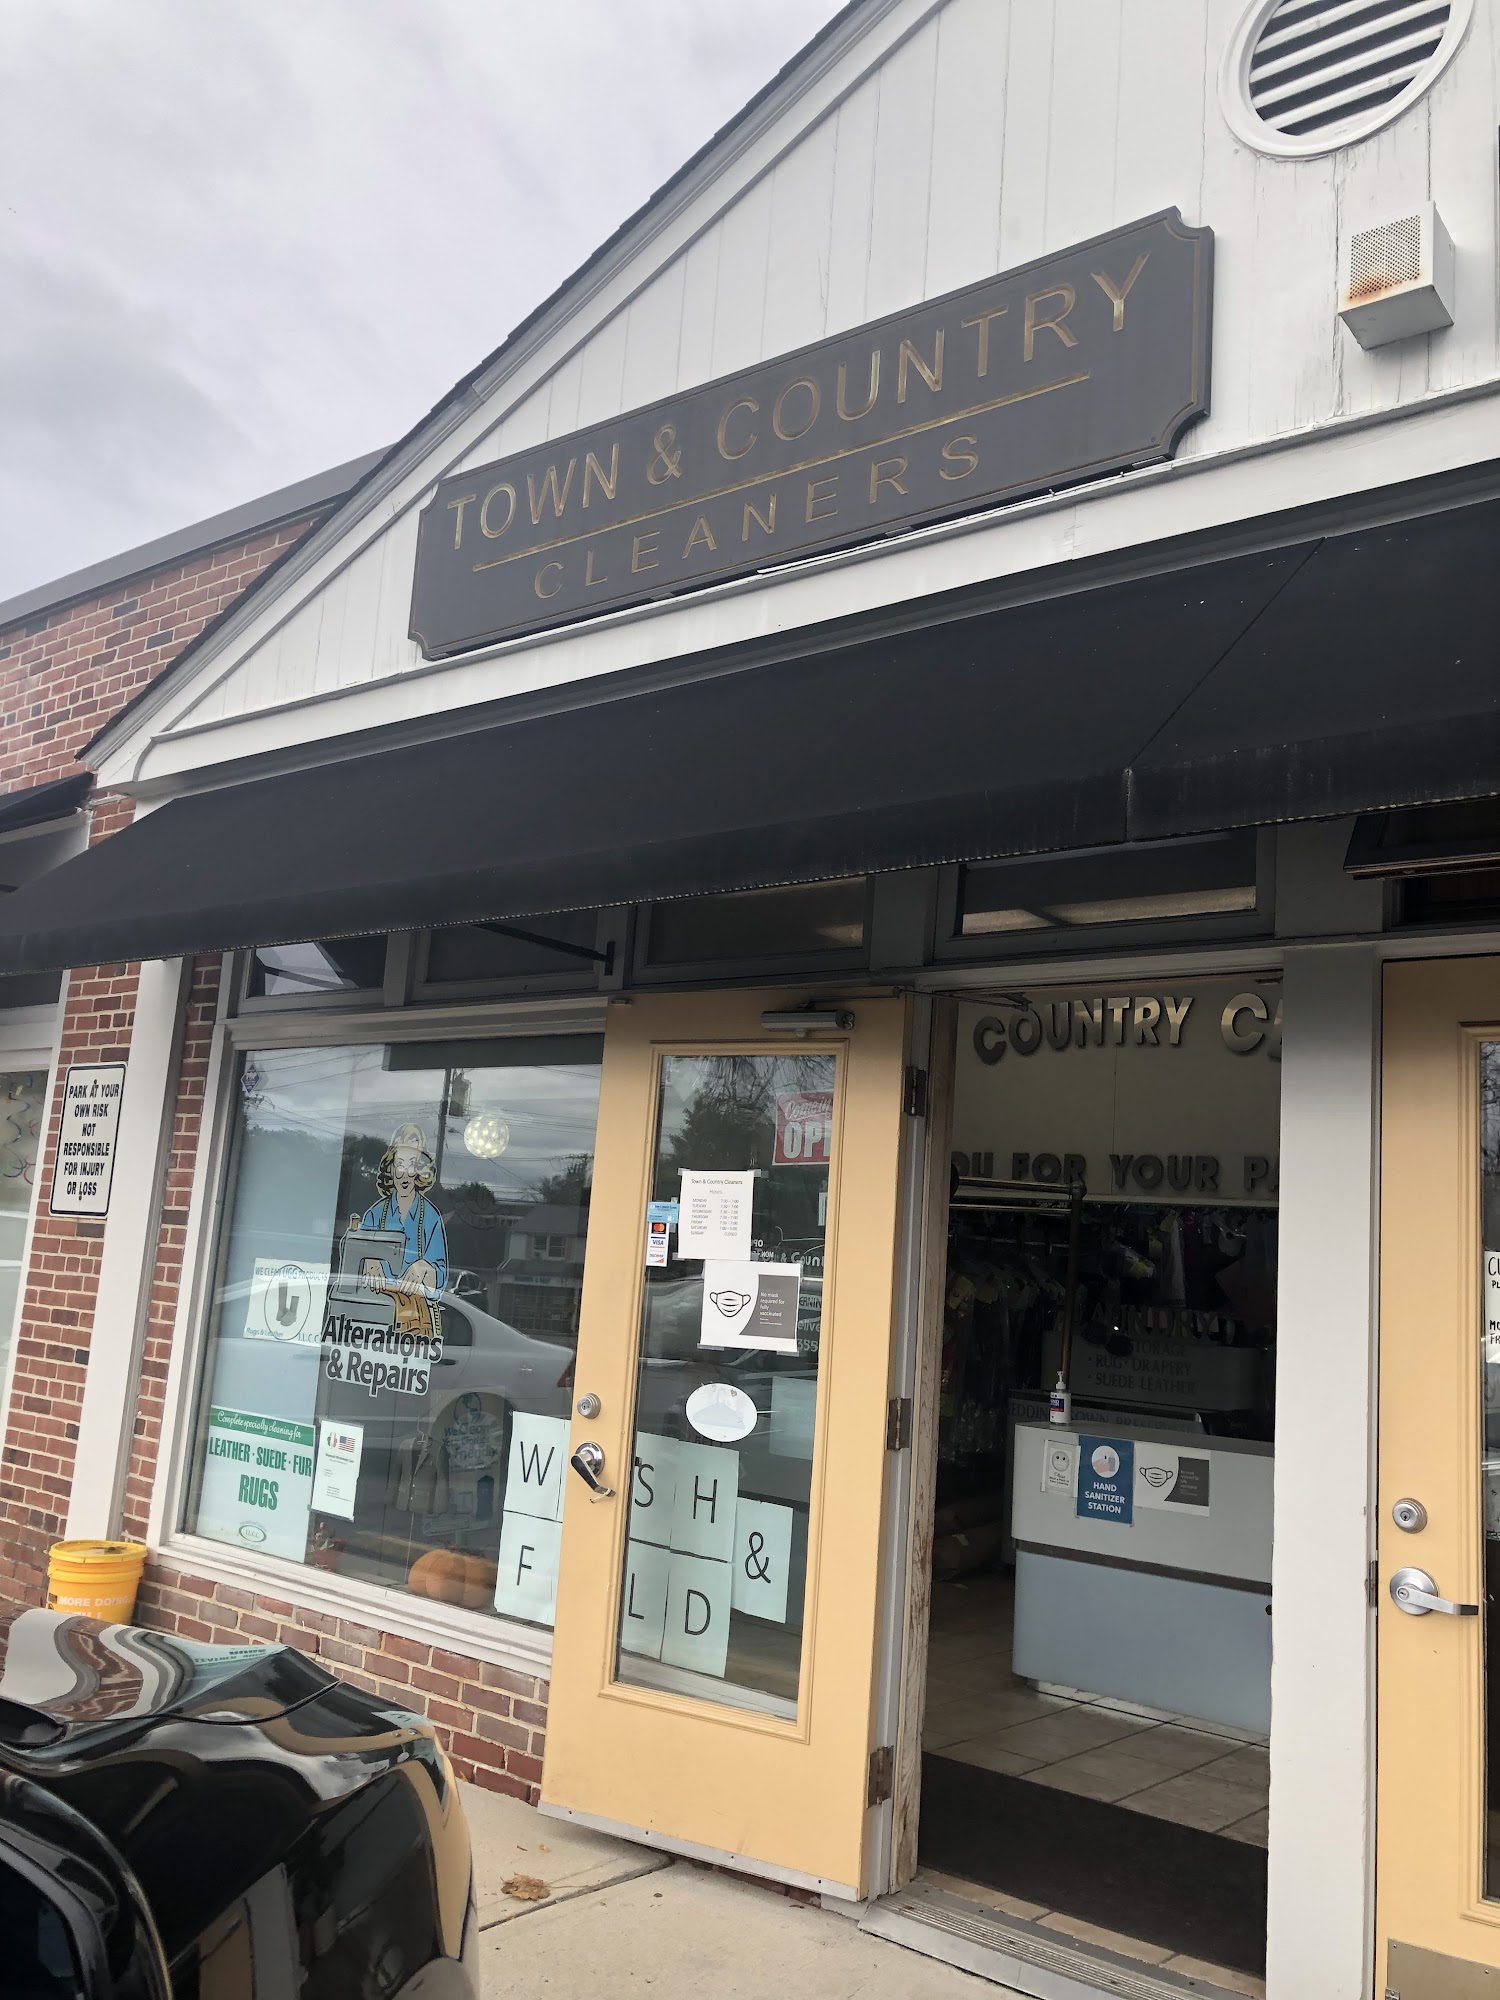 Town and Country Cleaners 421 King St, Chappaqua New York 10514